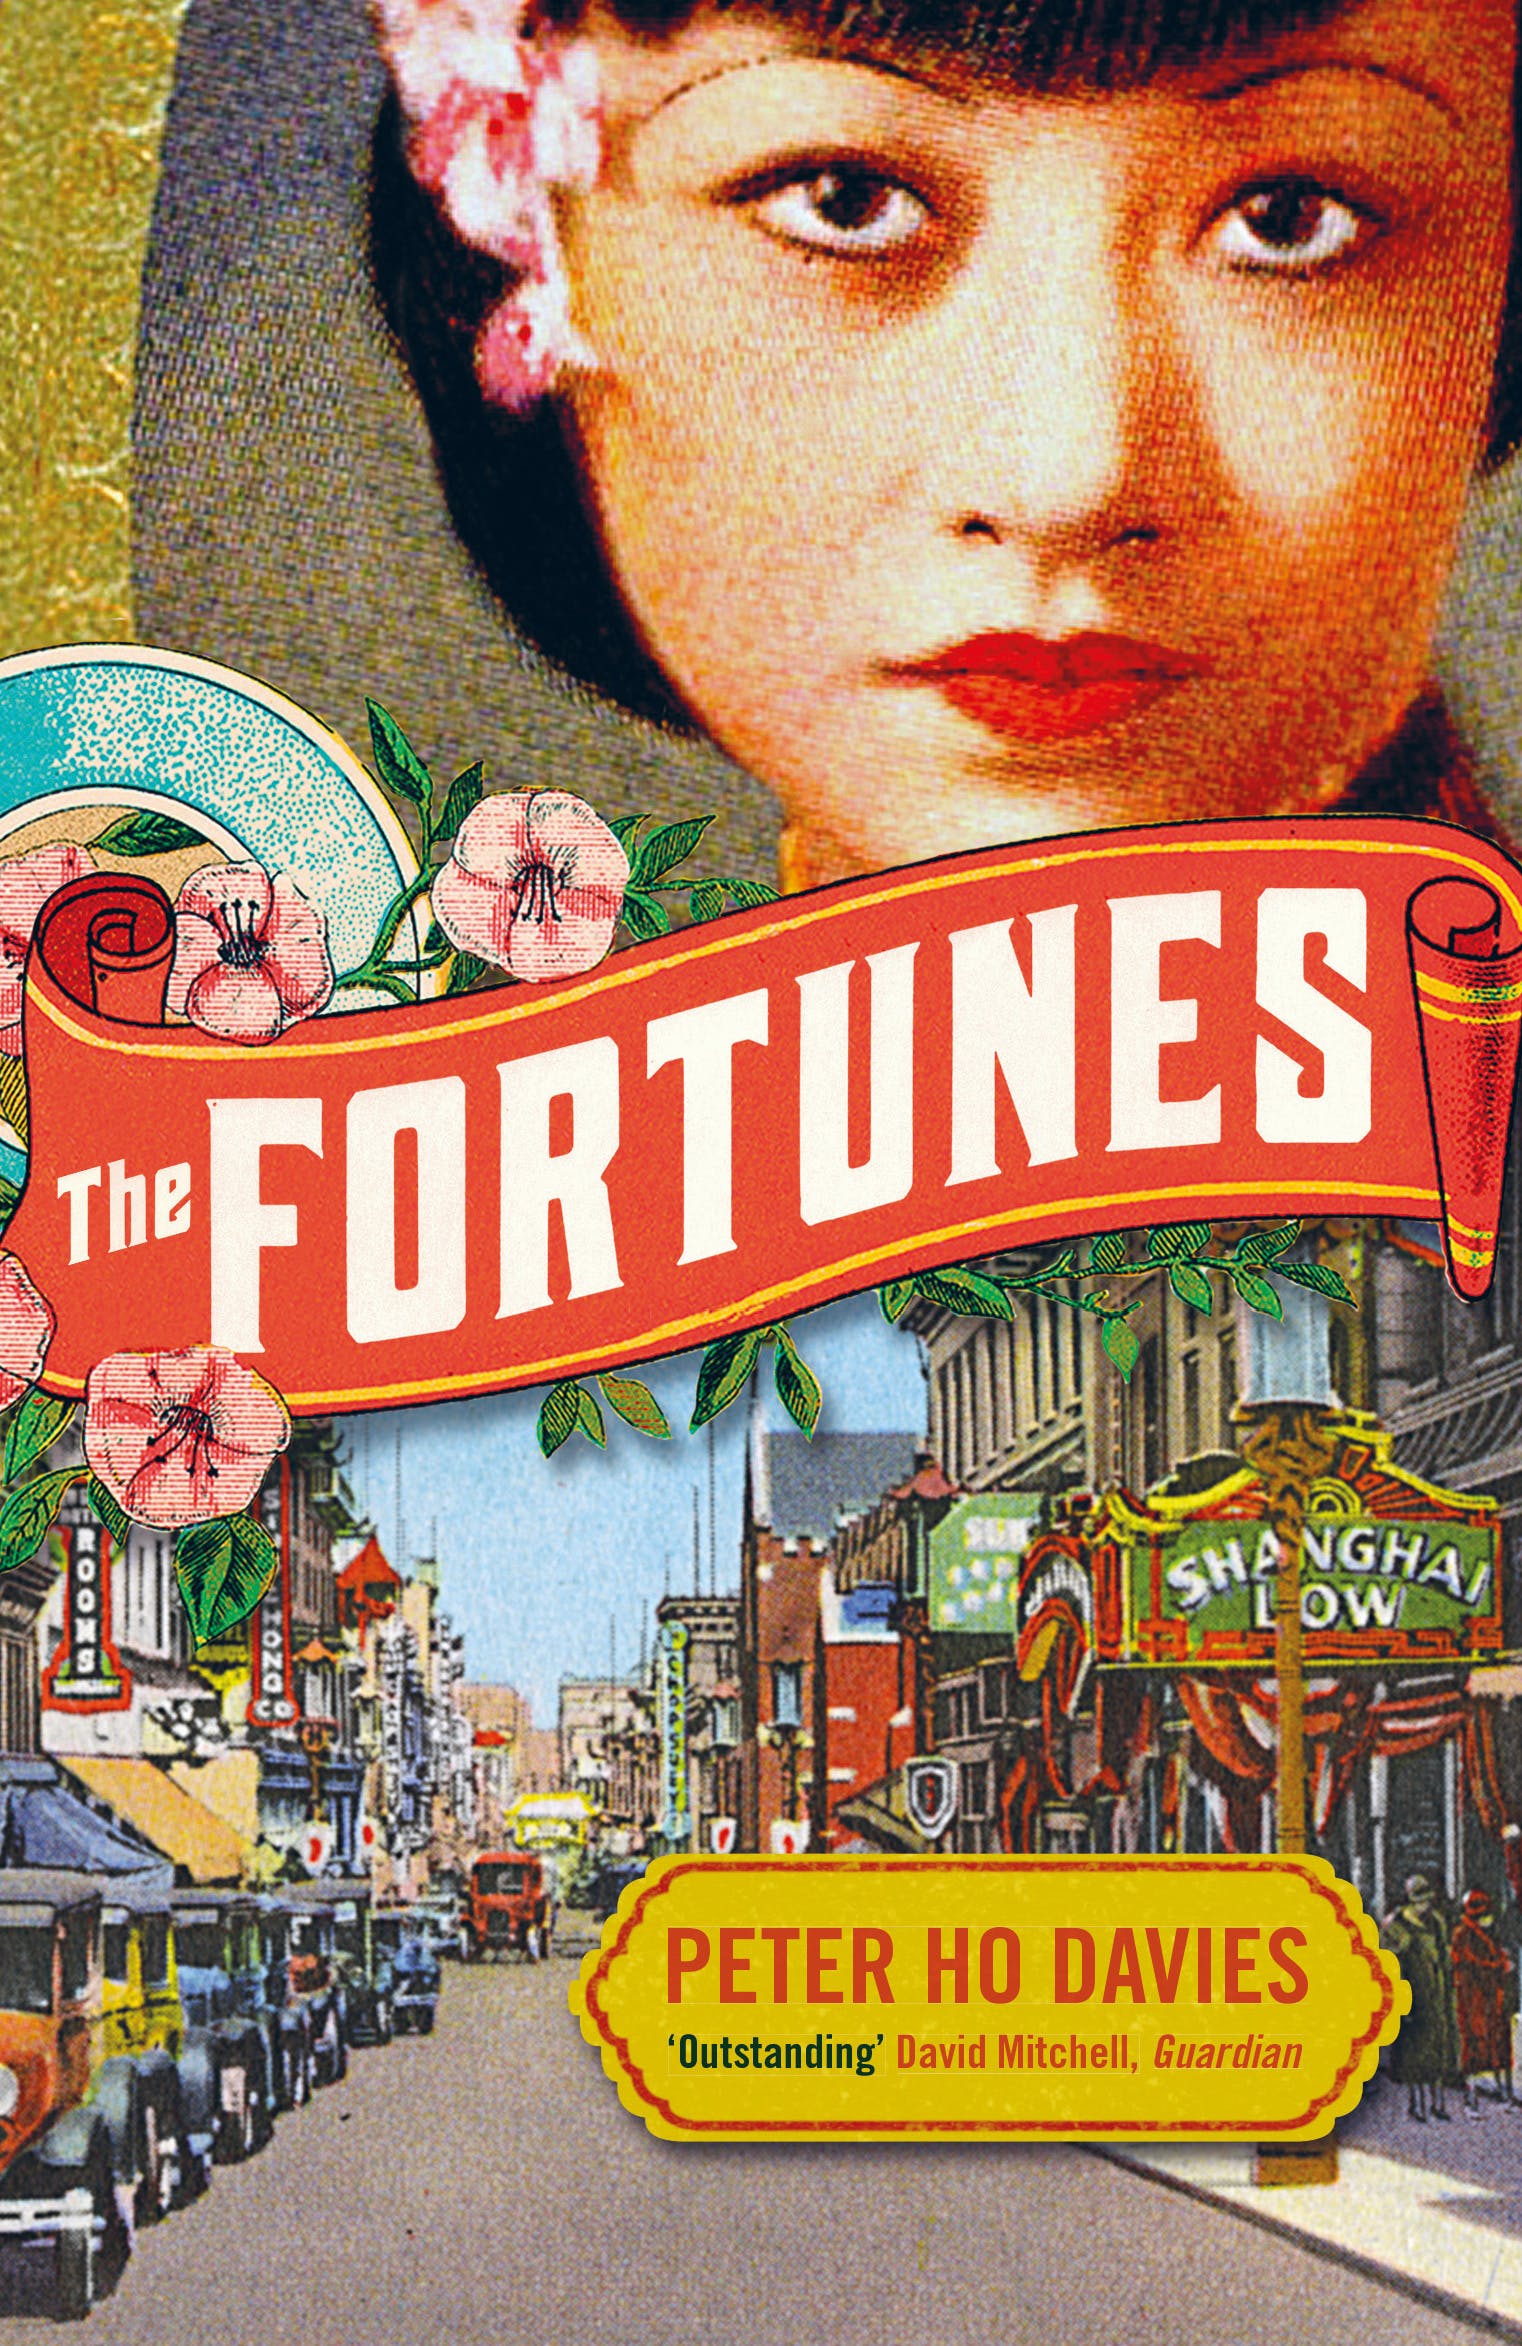 Peter Ho Davies: The fortunes (2016)